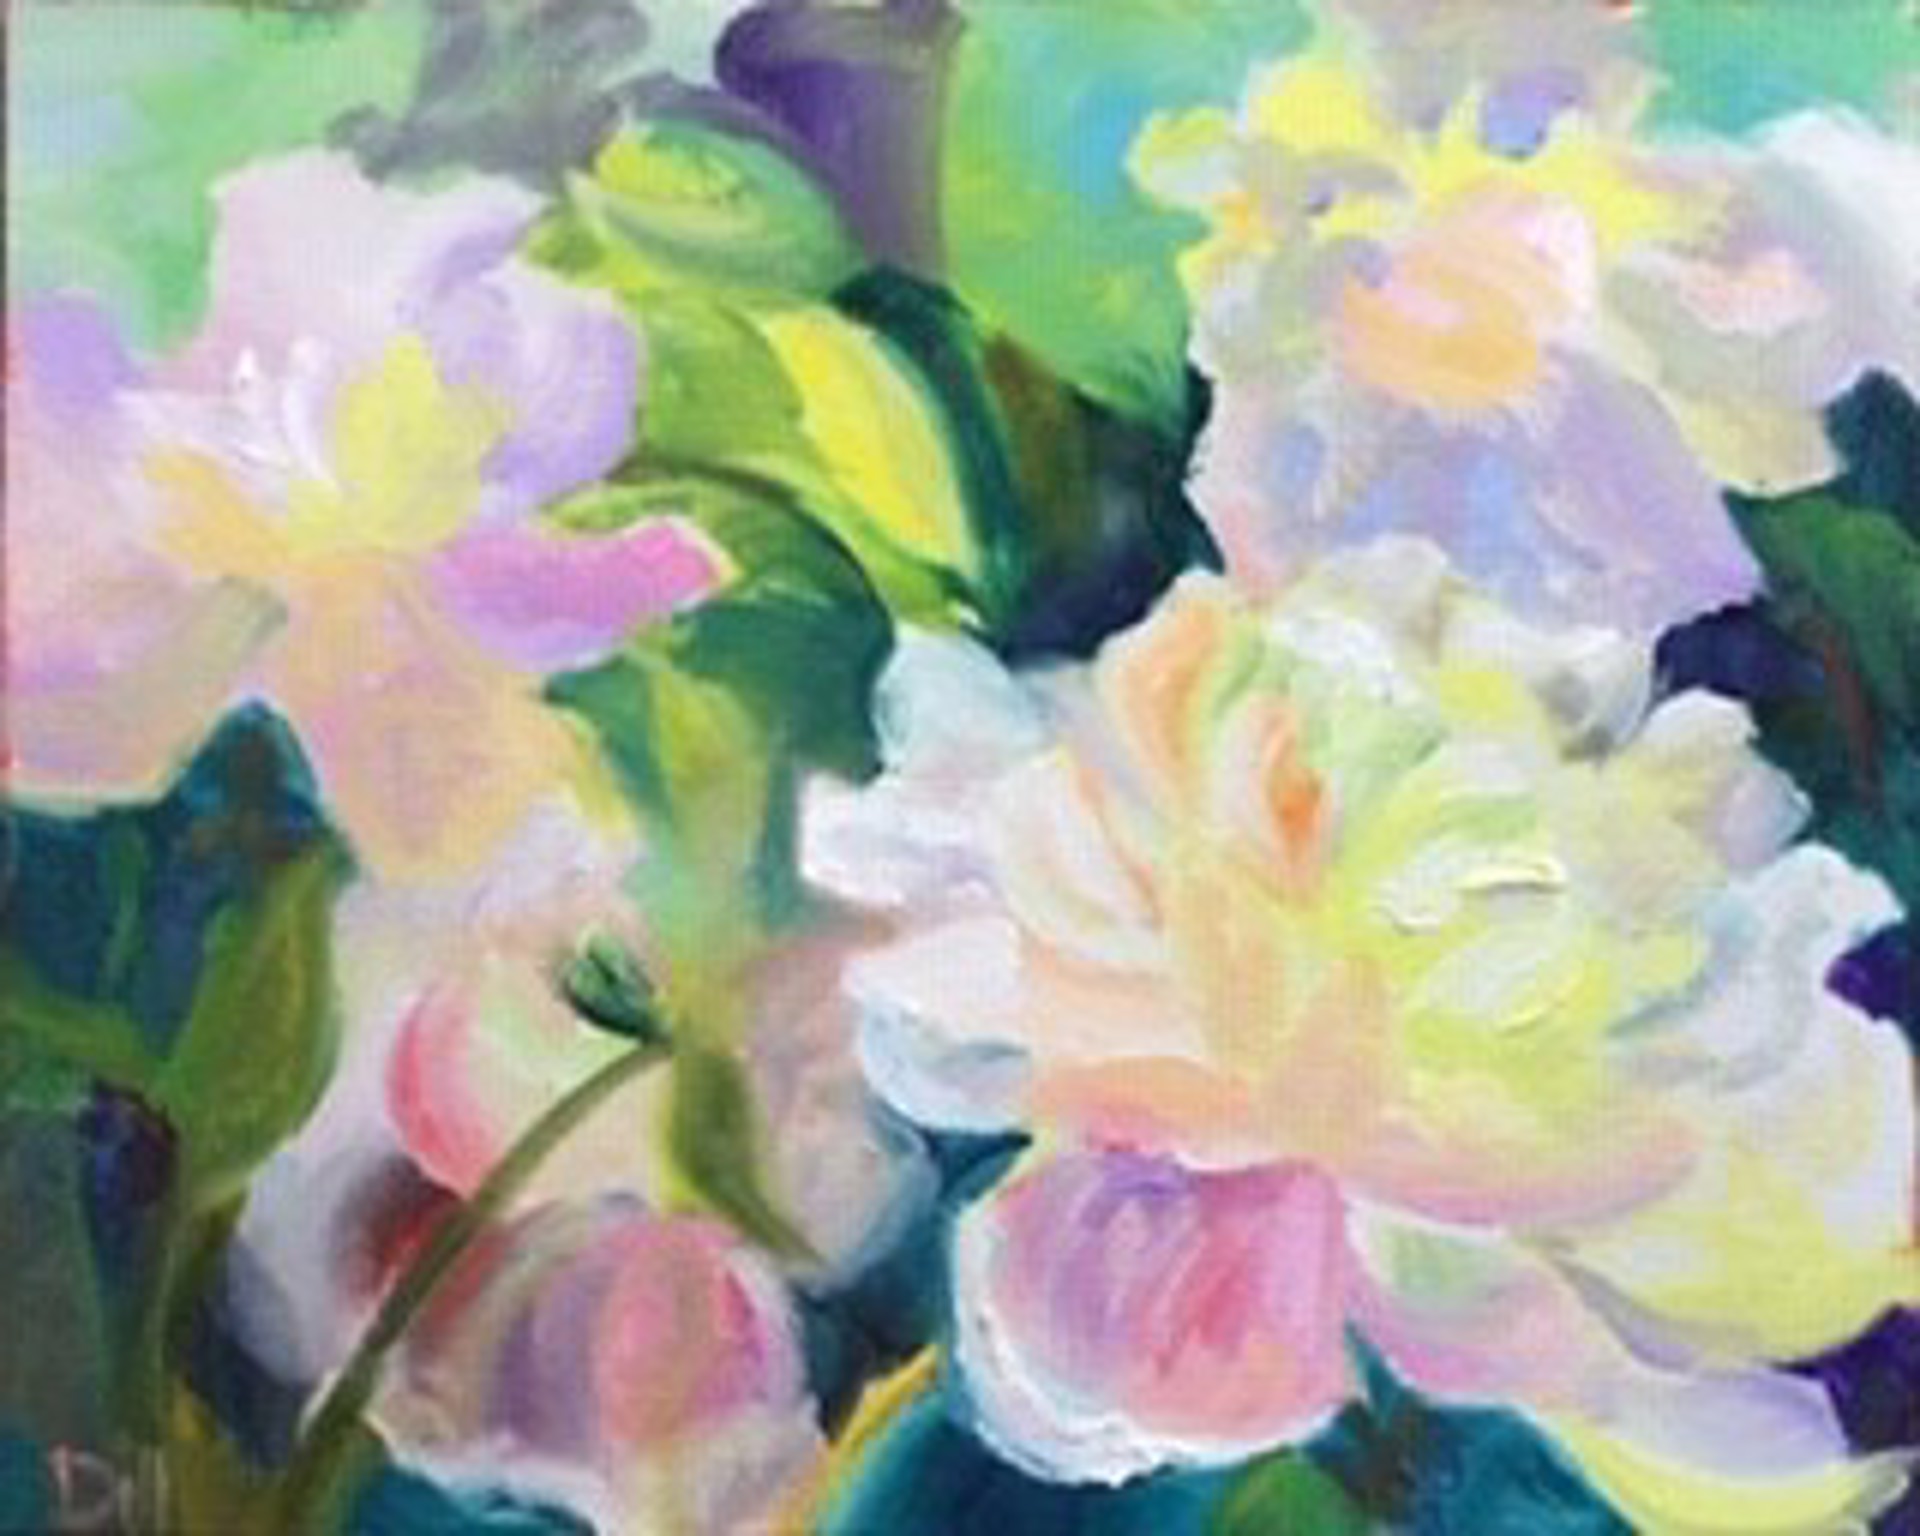 Light On The Peonies by Kristen Dill